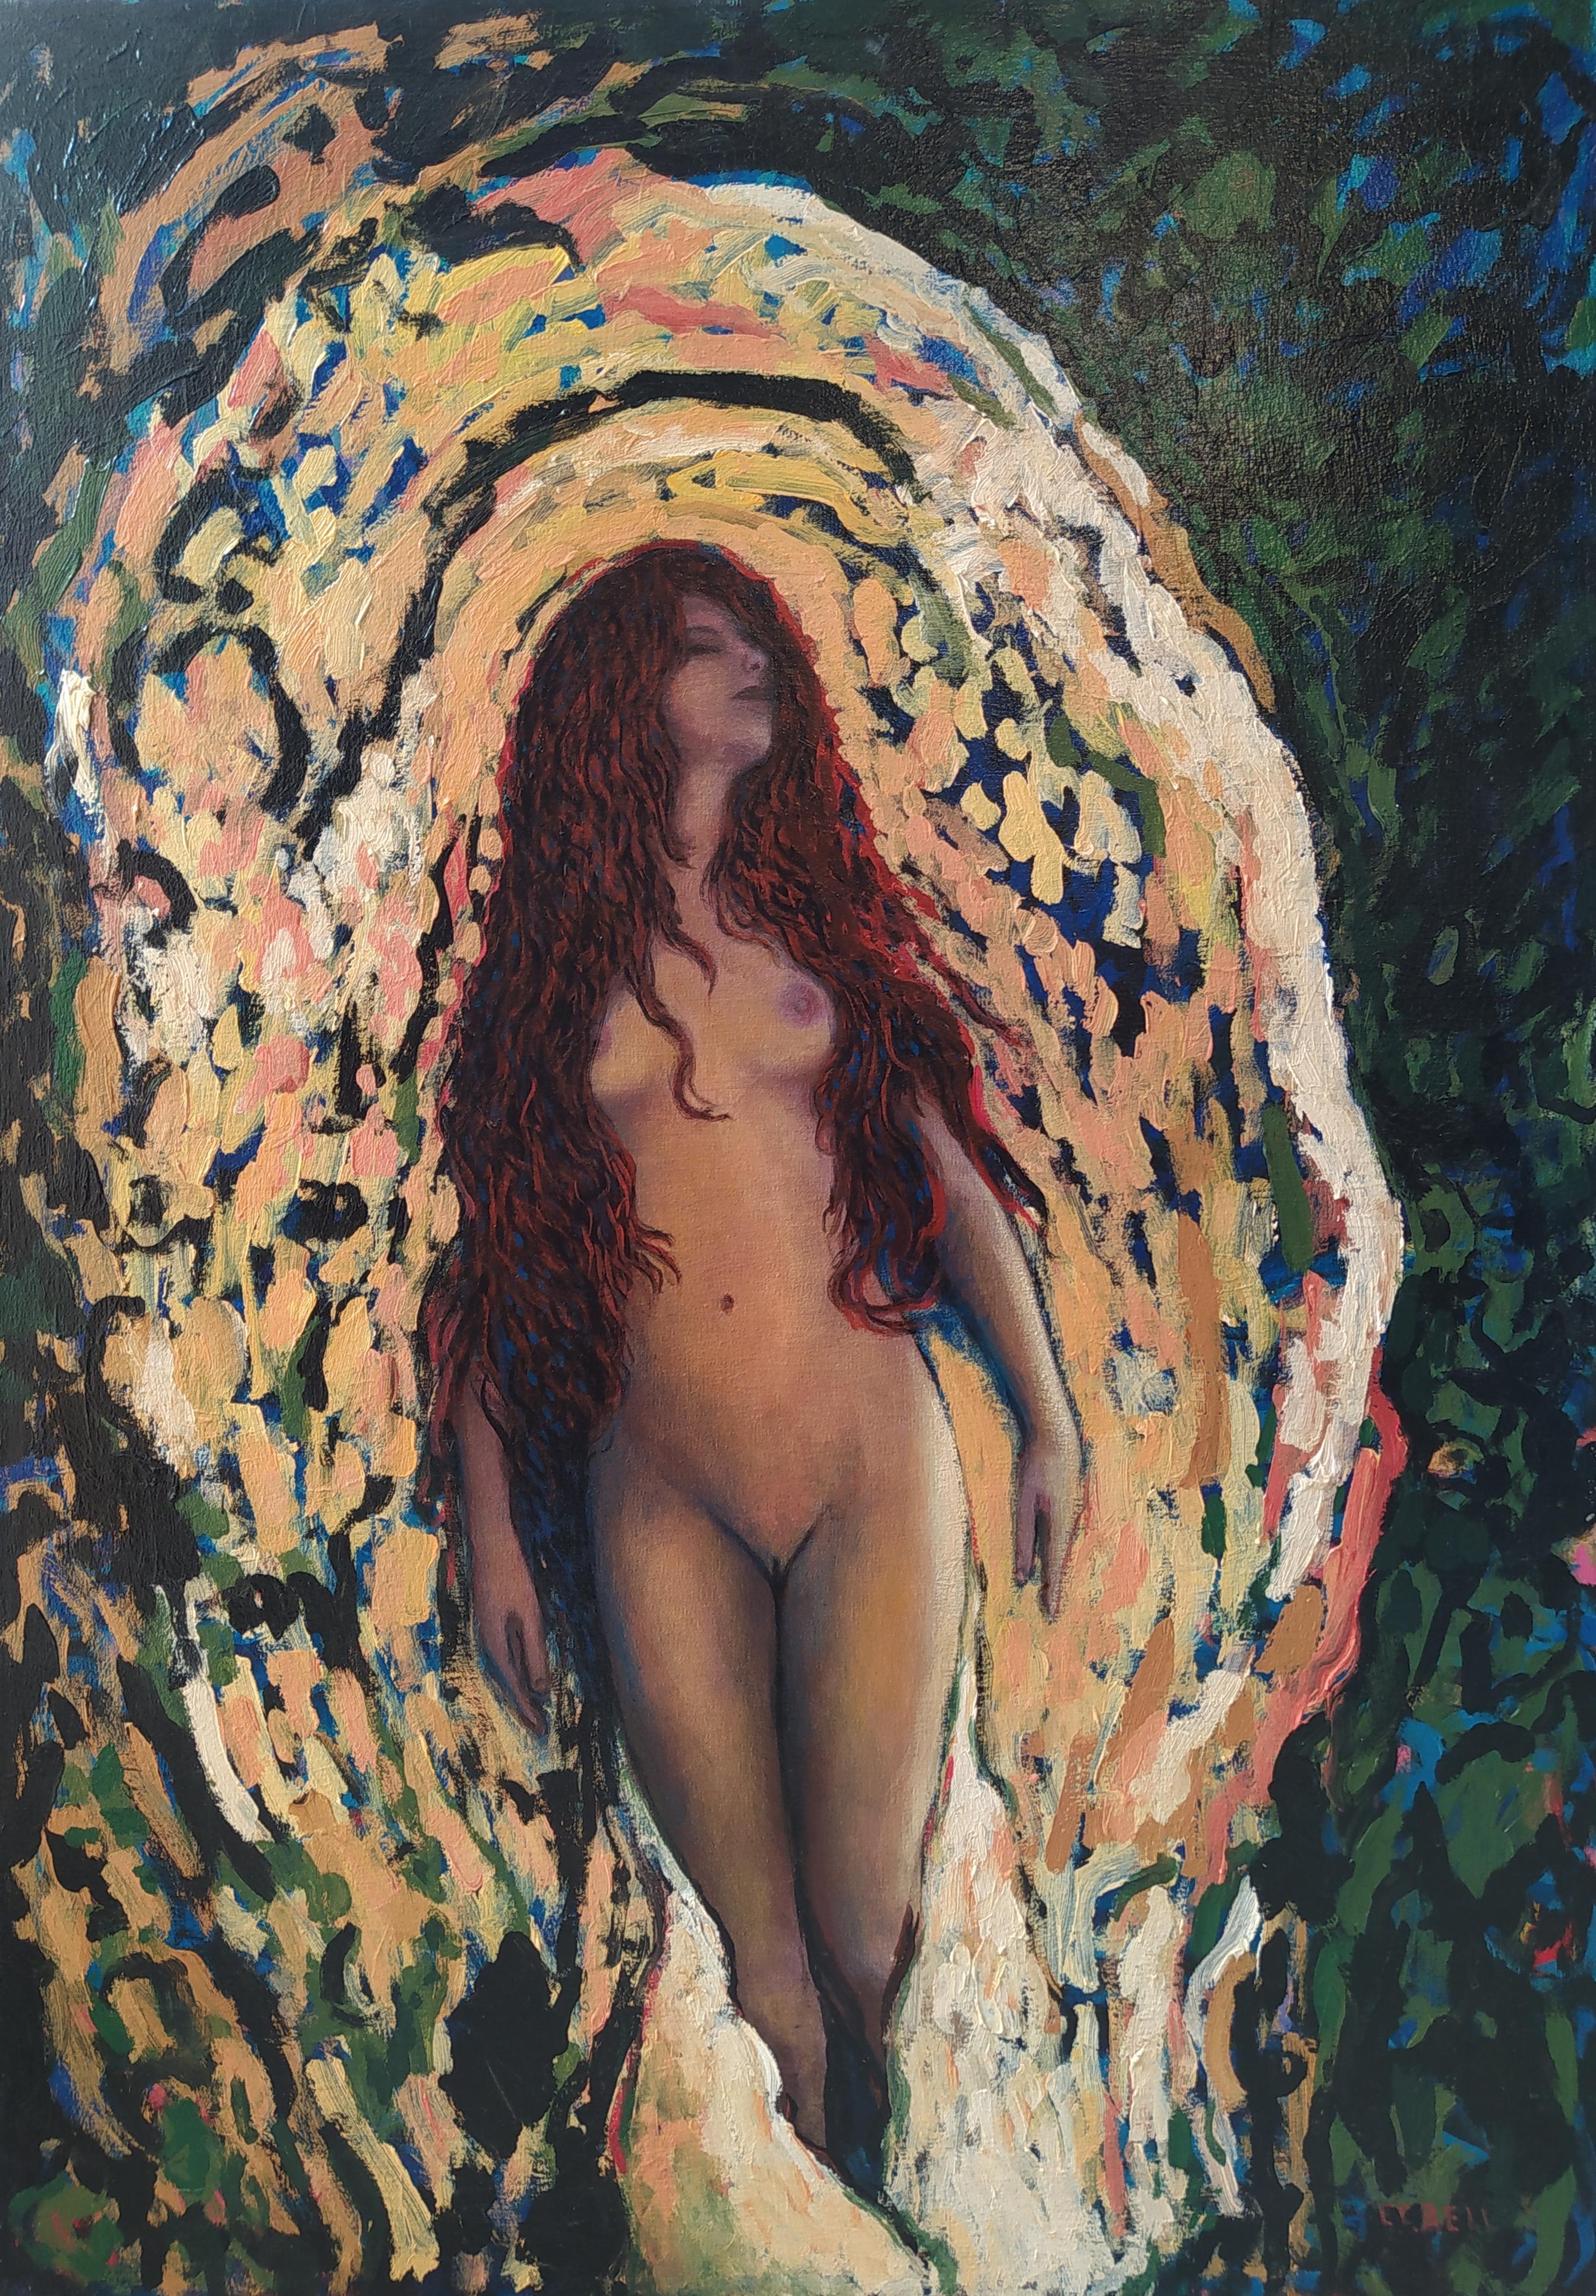 E.C. Bell Nude Painting - "Ginger Portal" - Vertical expressionist female nude in dark & light colors.